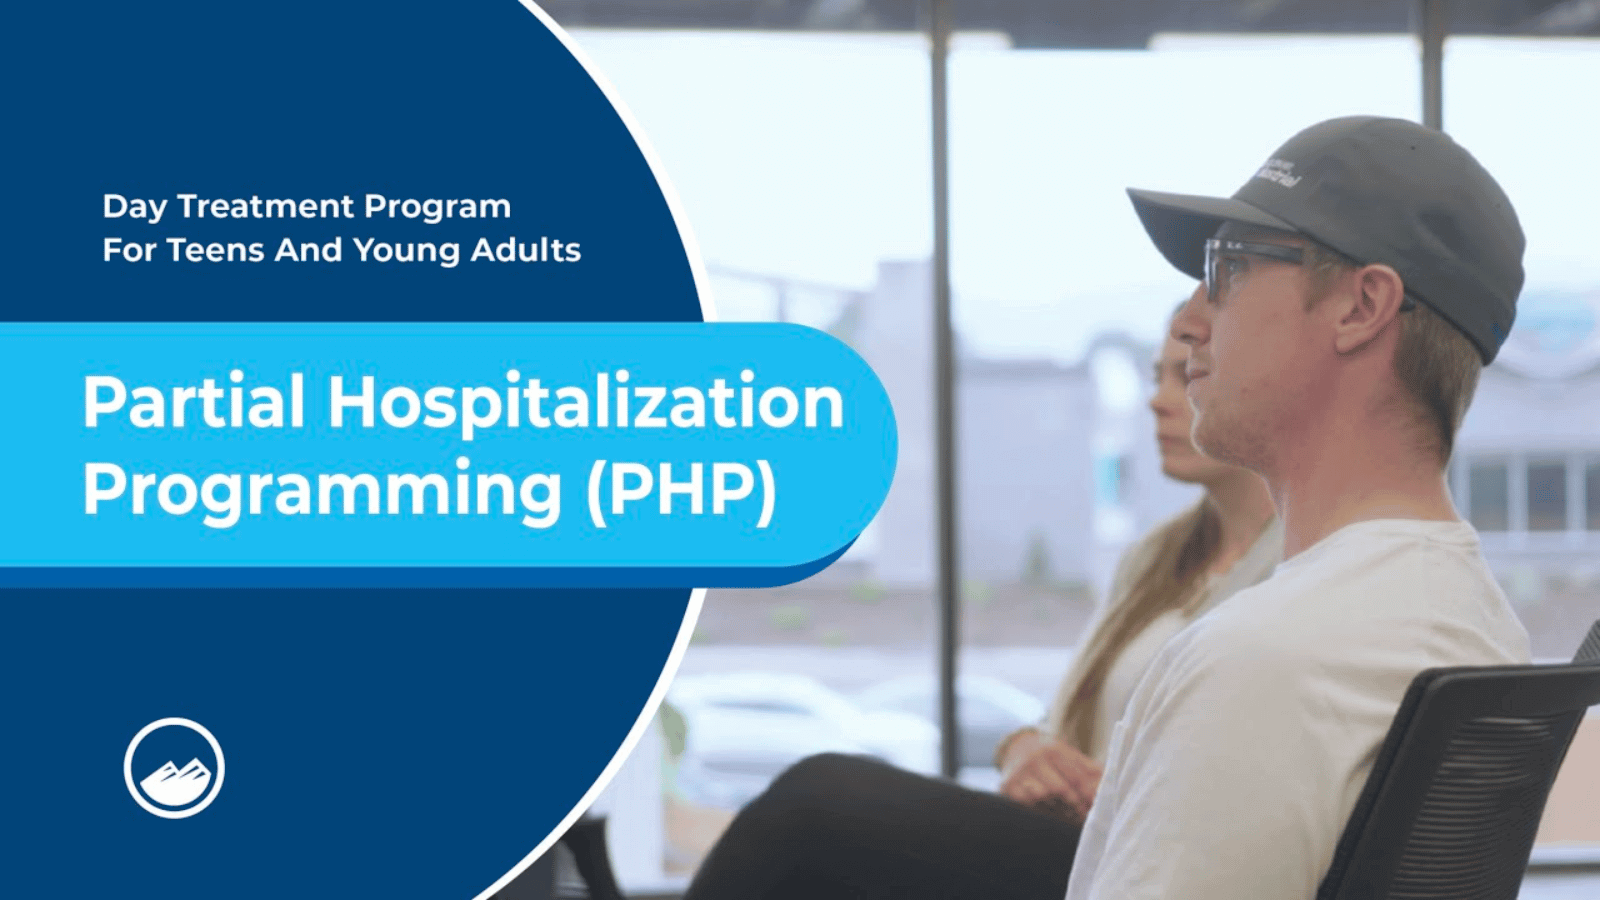 Partial Hospitalization Program Explained with an image of a client in the program